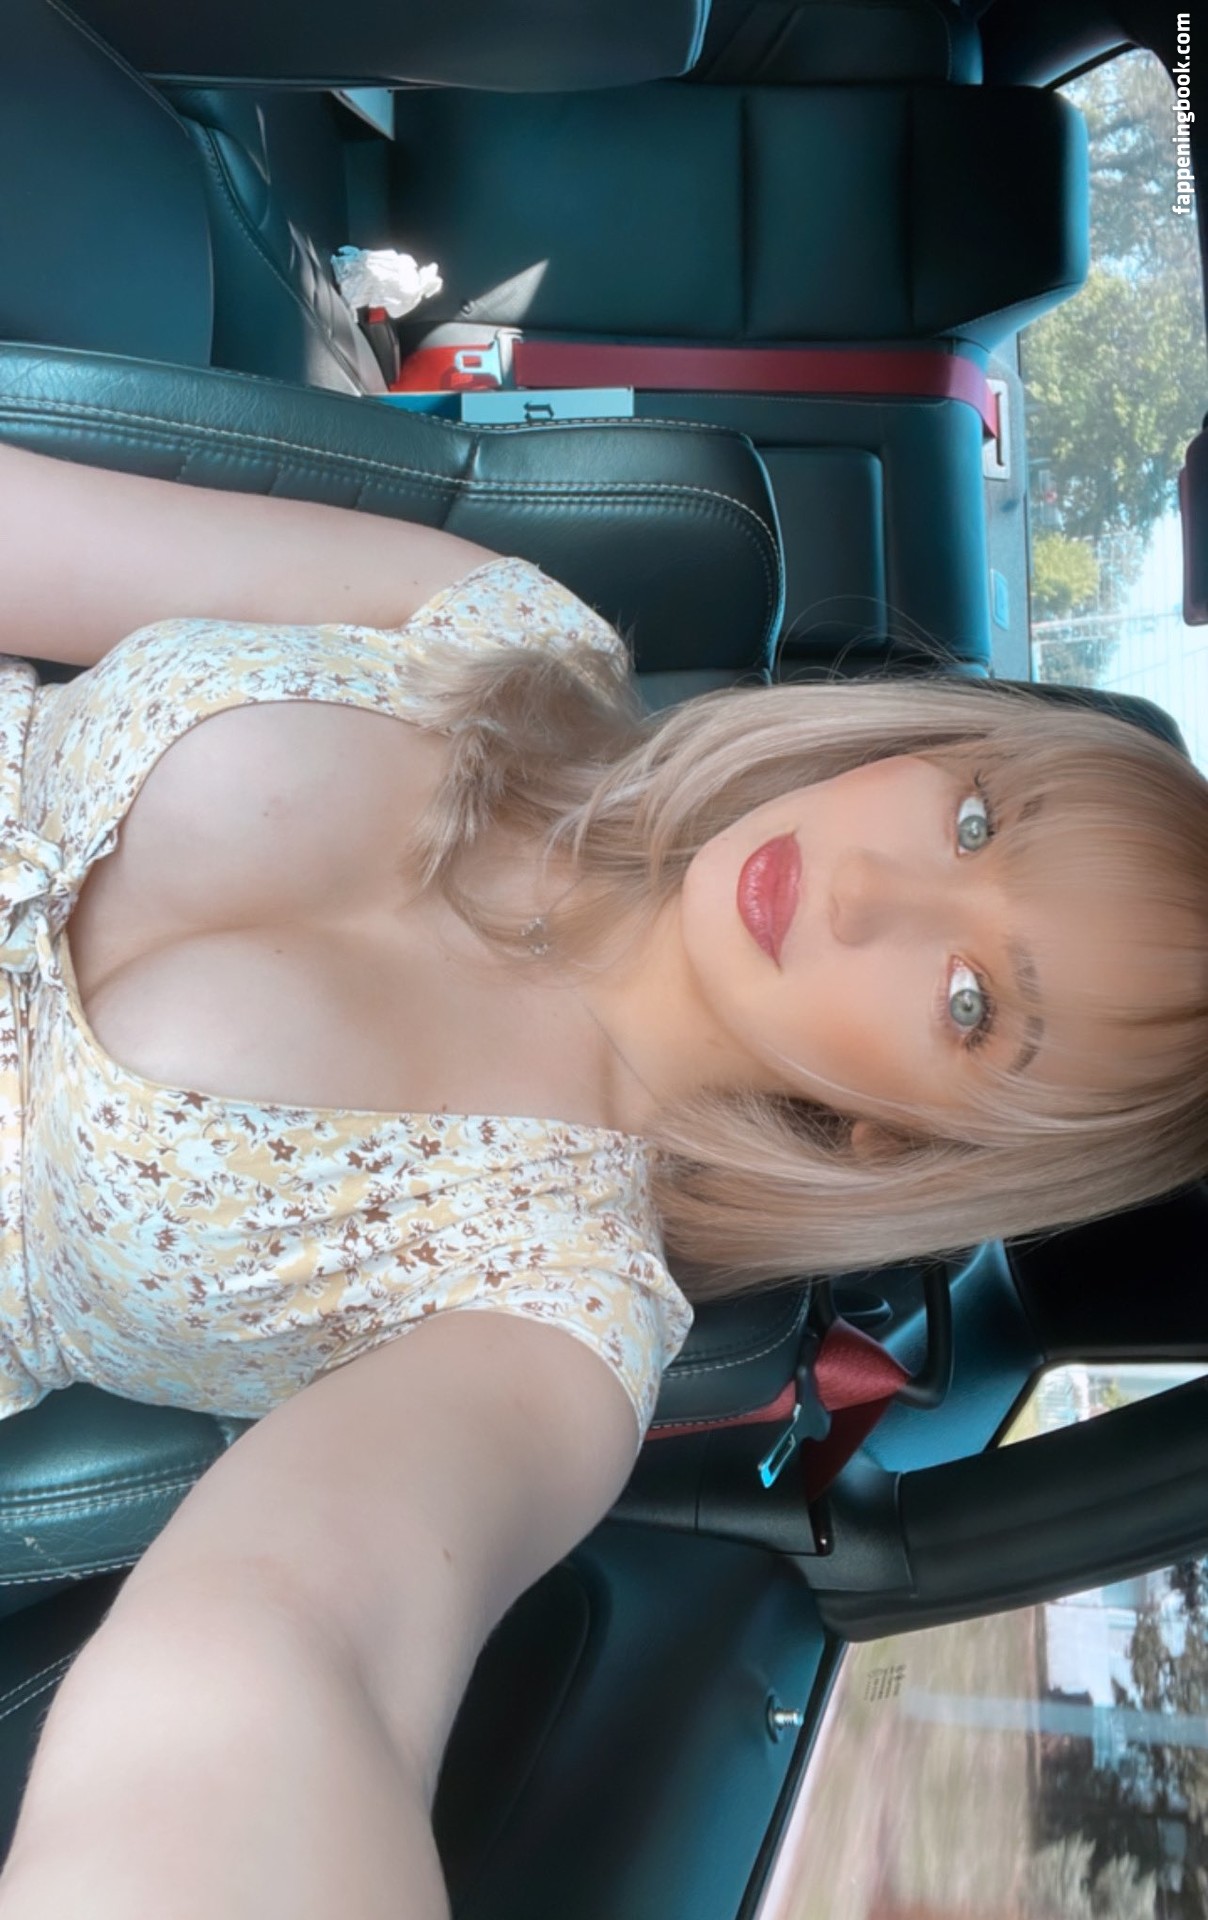 Kbubblez Nude, The Fappening - Photo #2196758 - FappeningBook